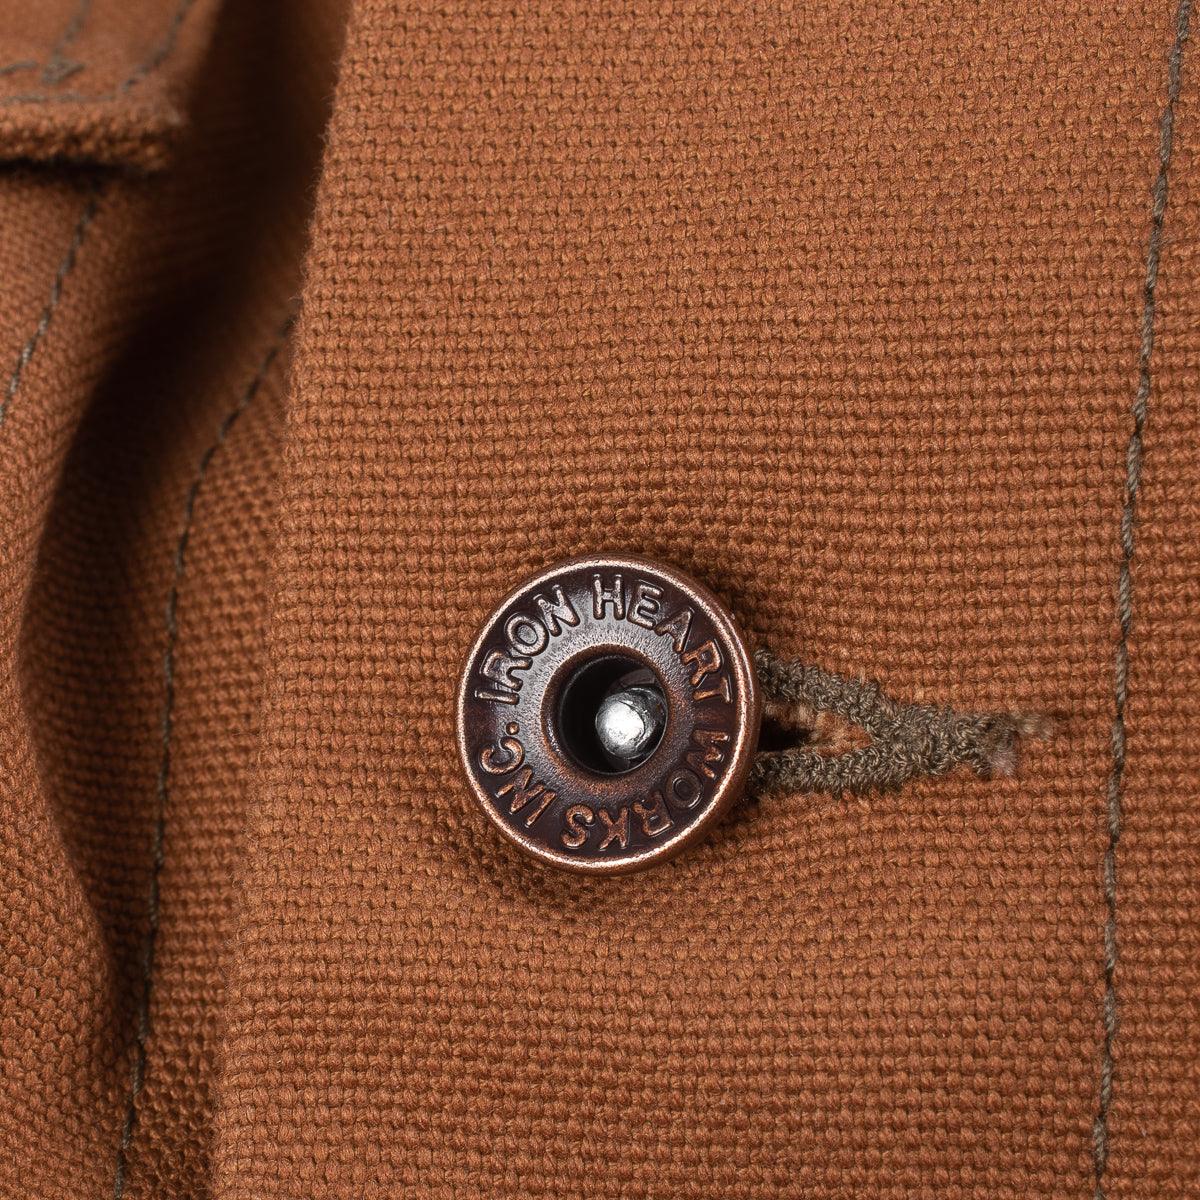 Image showing the IH-2526J - 17oz Duck Modified Type III Jacket - Brown which is a Jackets described by the following info Iron Heart, Jackets, Released, Tops and sold on the IRON HEART GERMANY online store